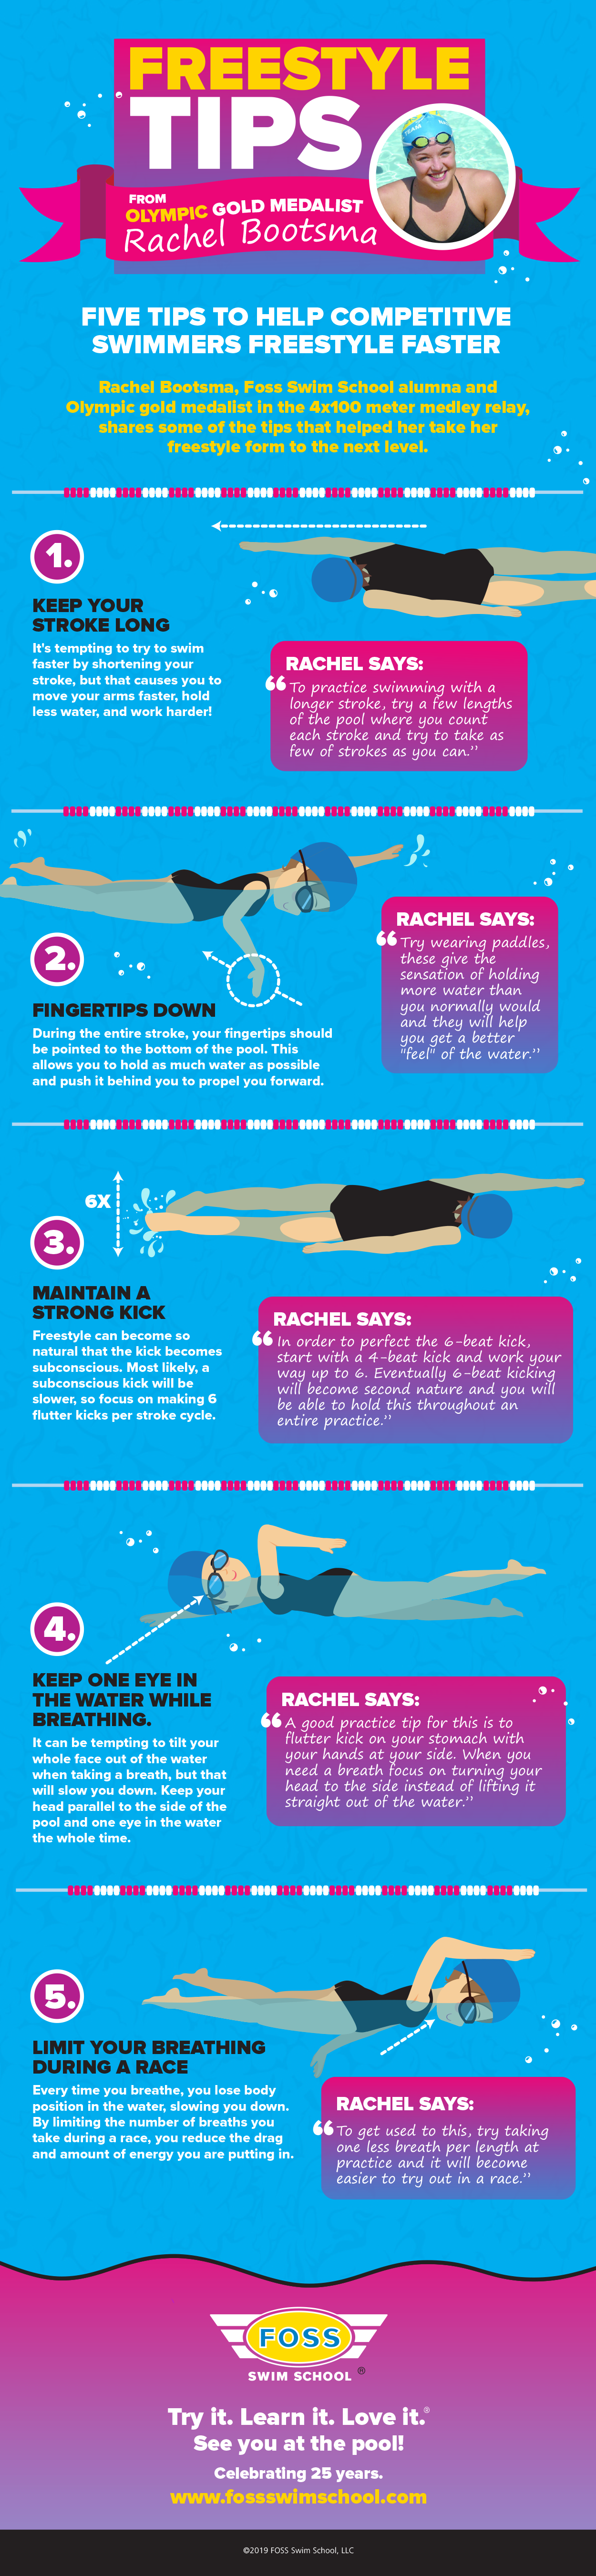 Infographic: 5 Tips to Swim the Freestyle Faster - Foss Swim School